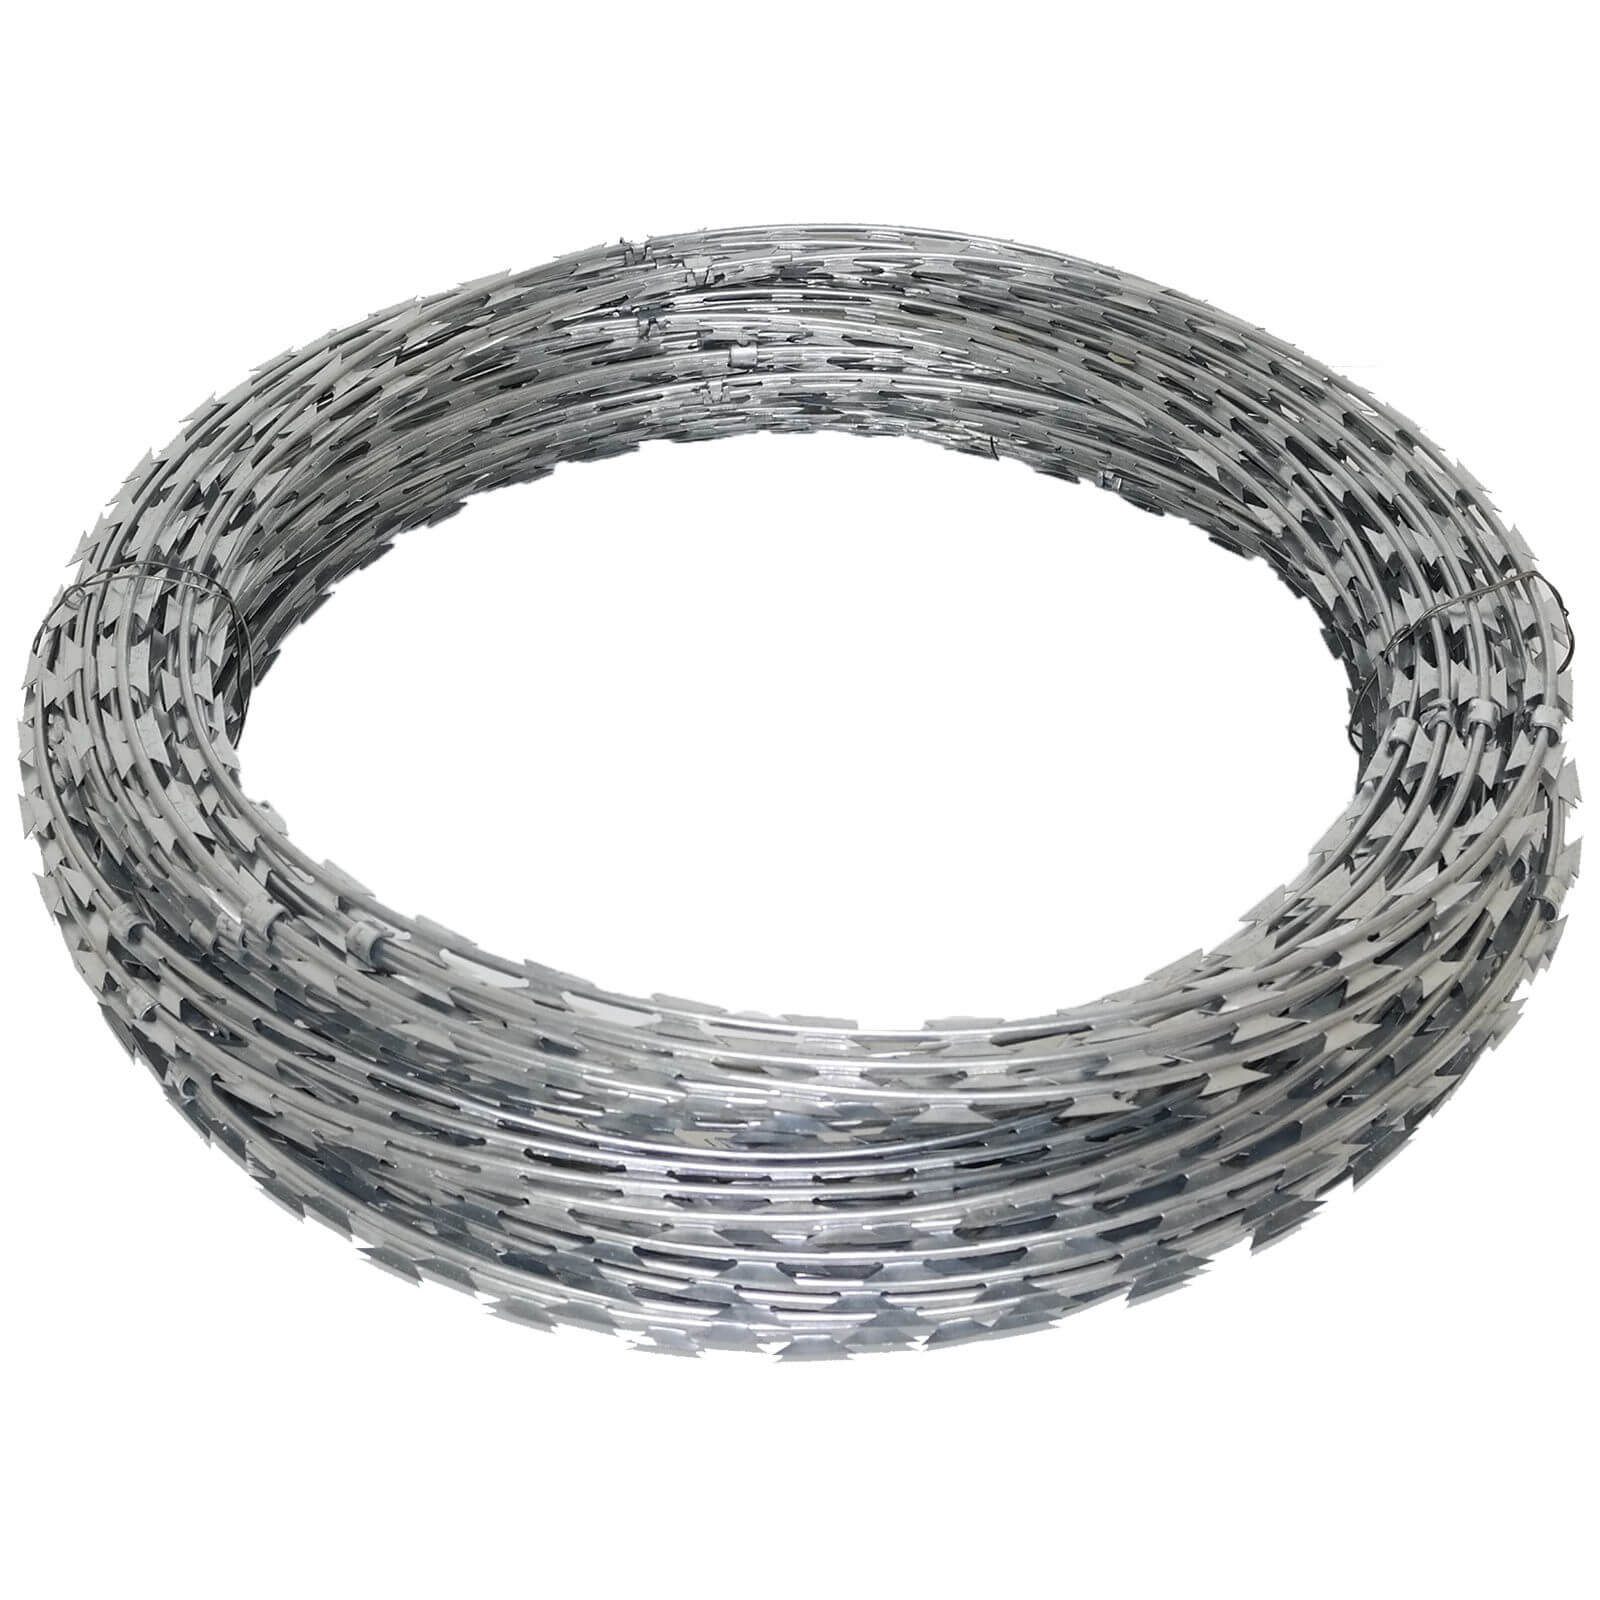 Razor wire - the ideal solution for safeguarding your property